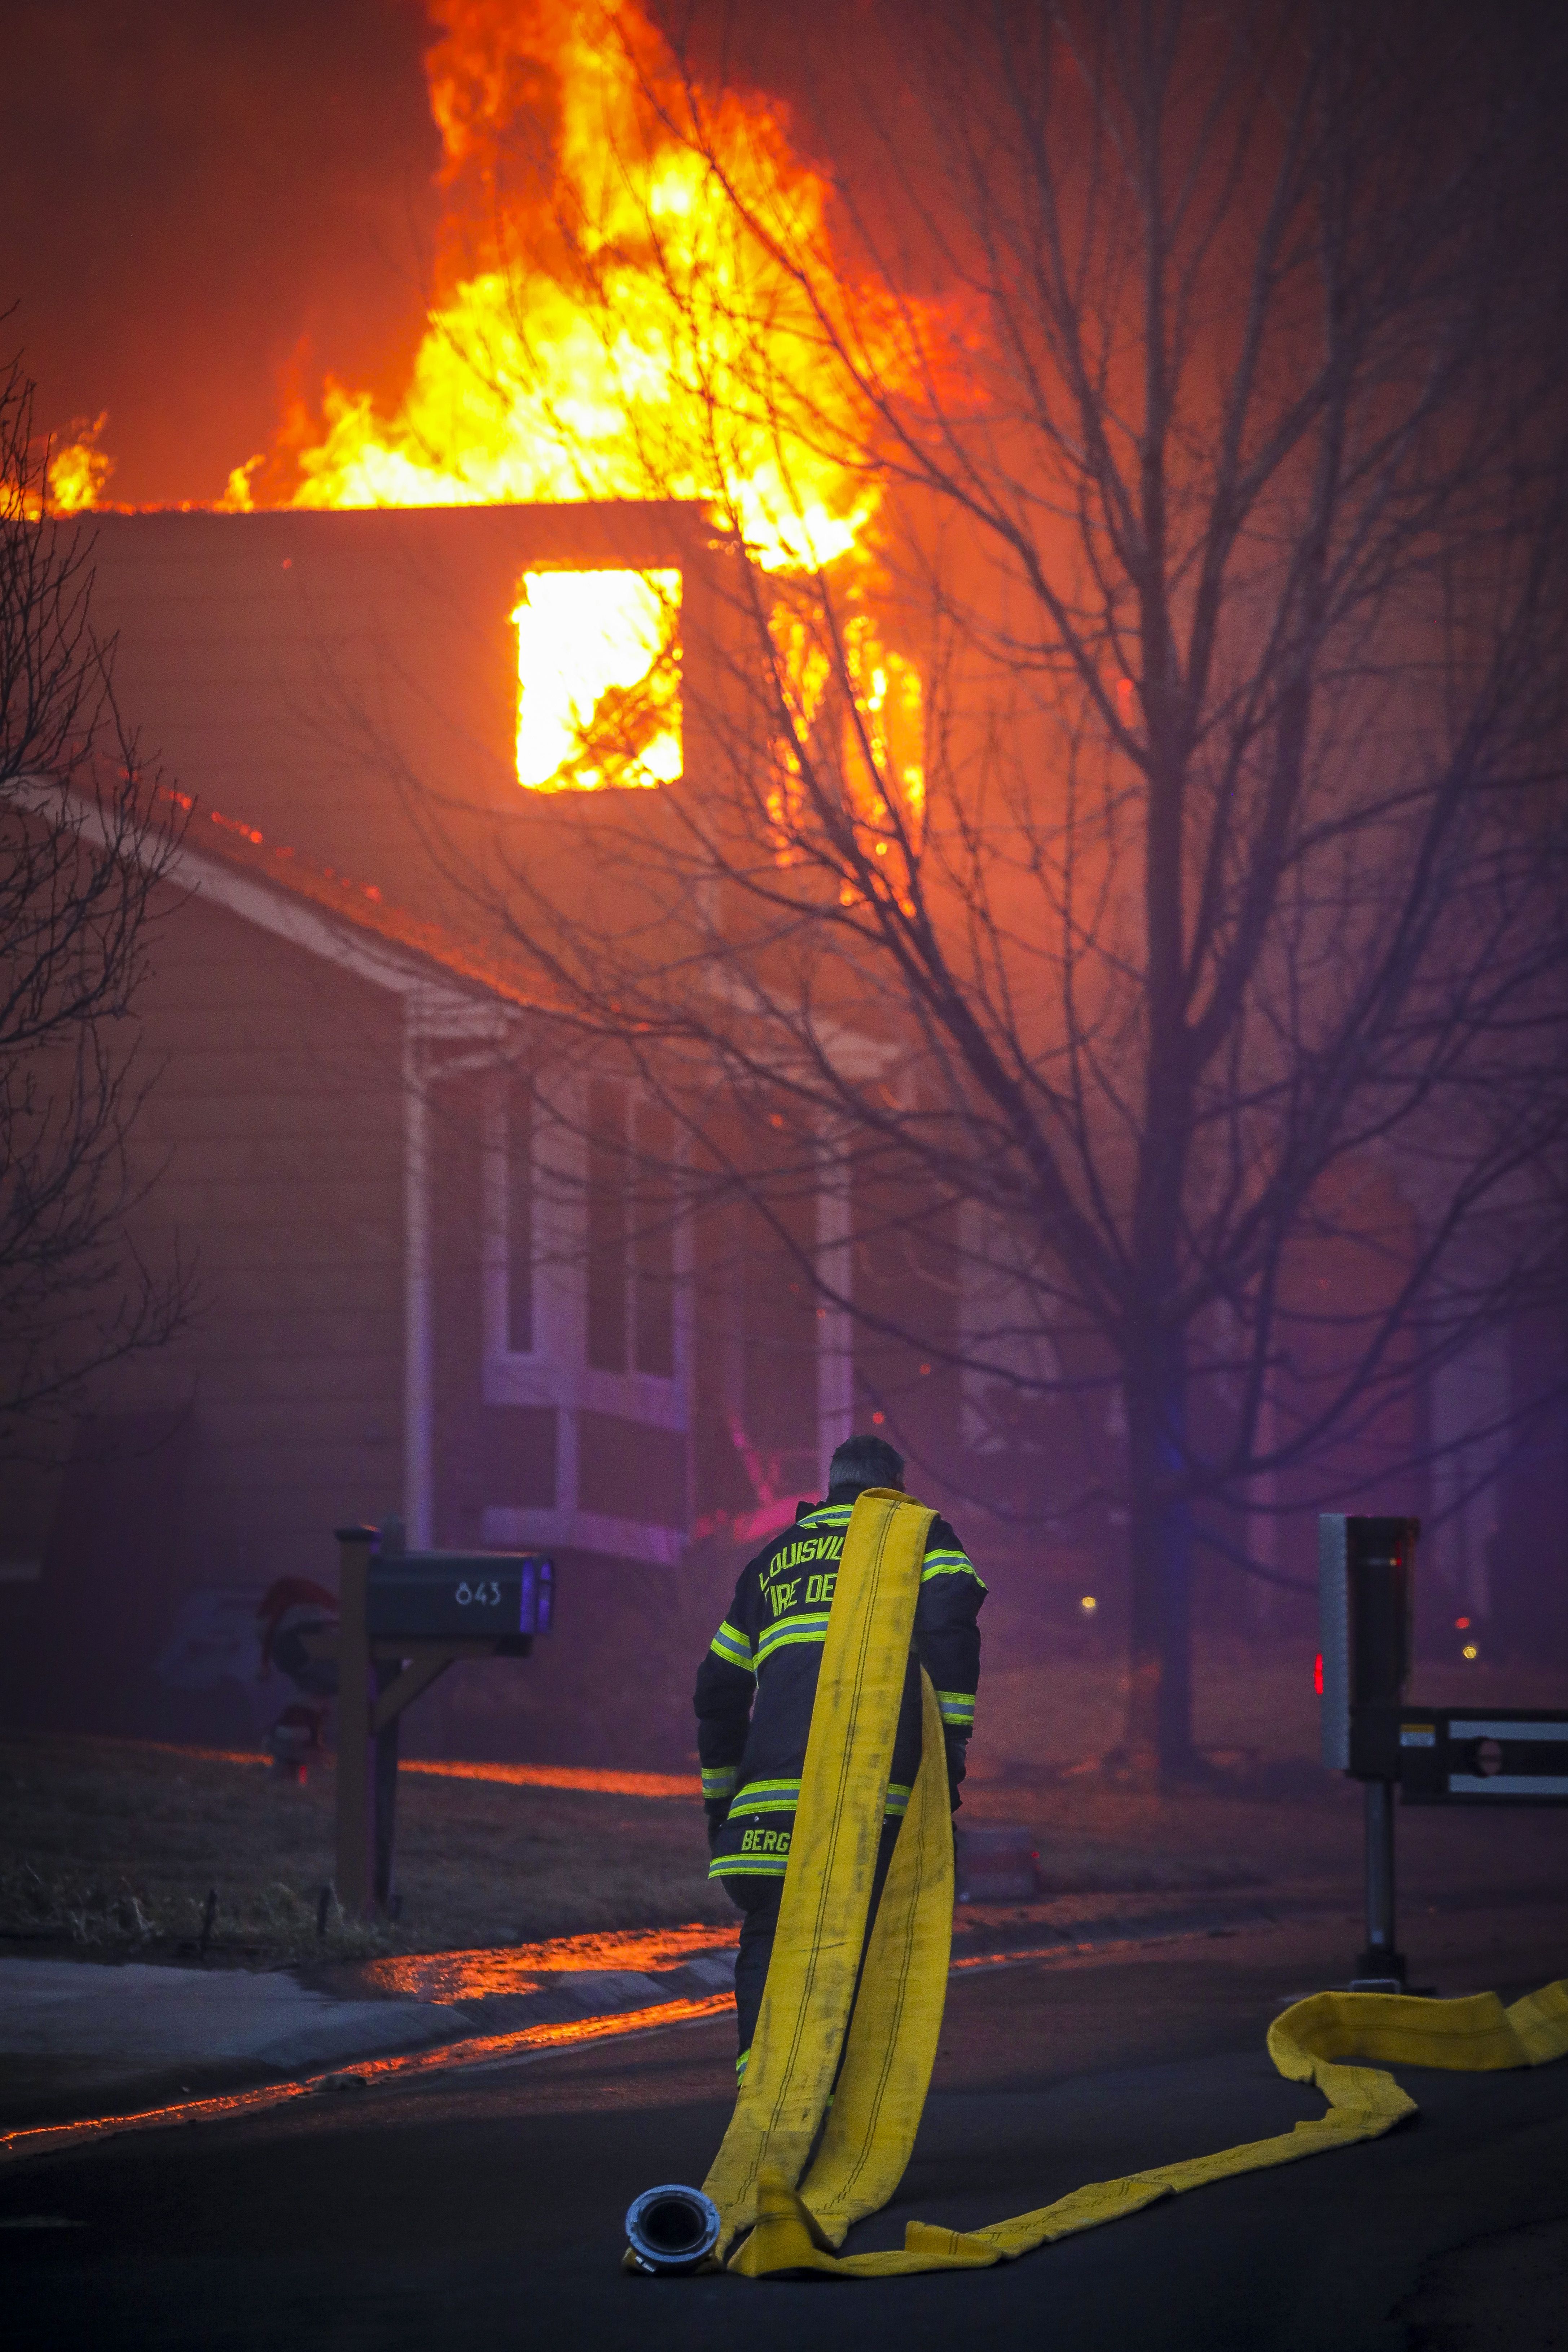 A Louisville firefighter pulls a fire hose through the smoke and haze while fighting a fast moving wildfire that swept through the area in the Centennial Heights neighborhood of Louisville.